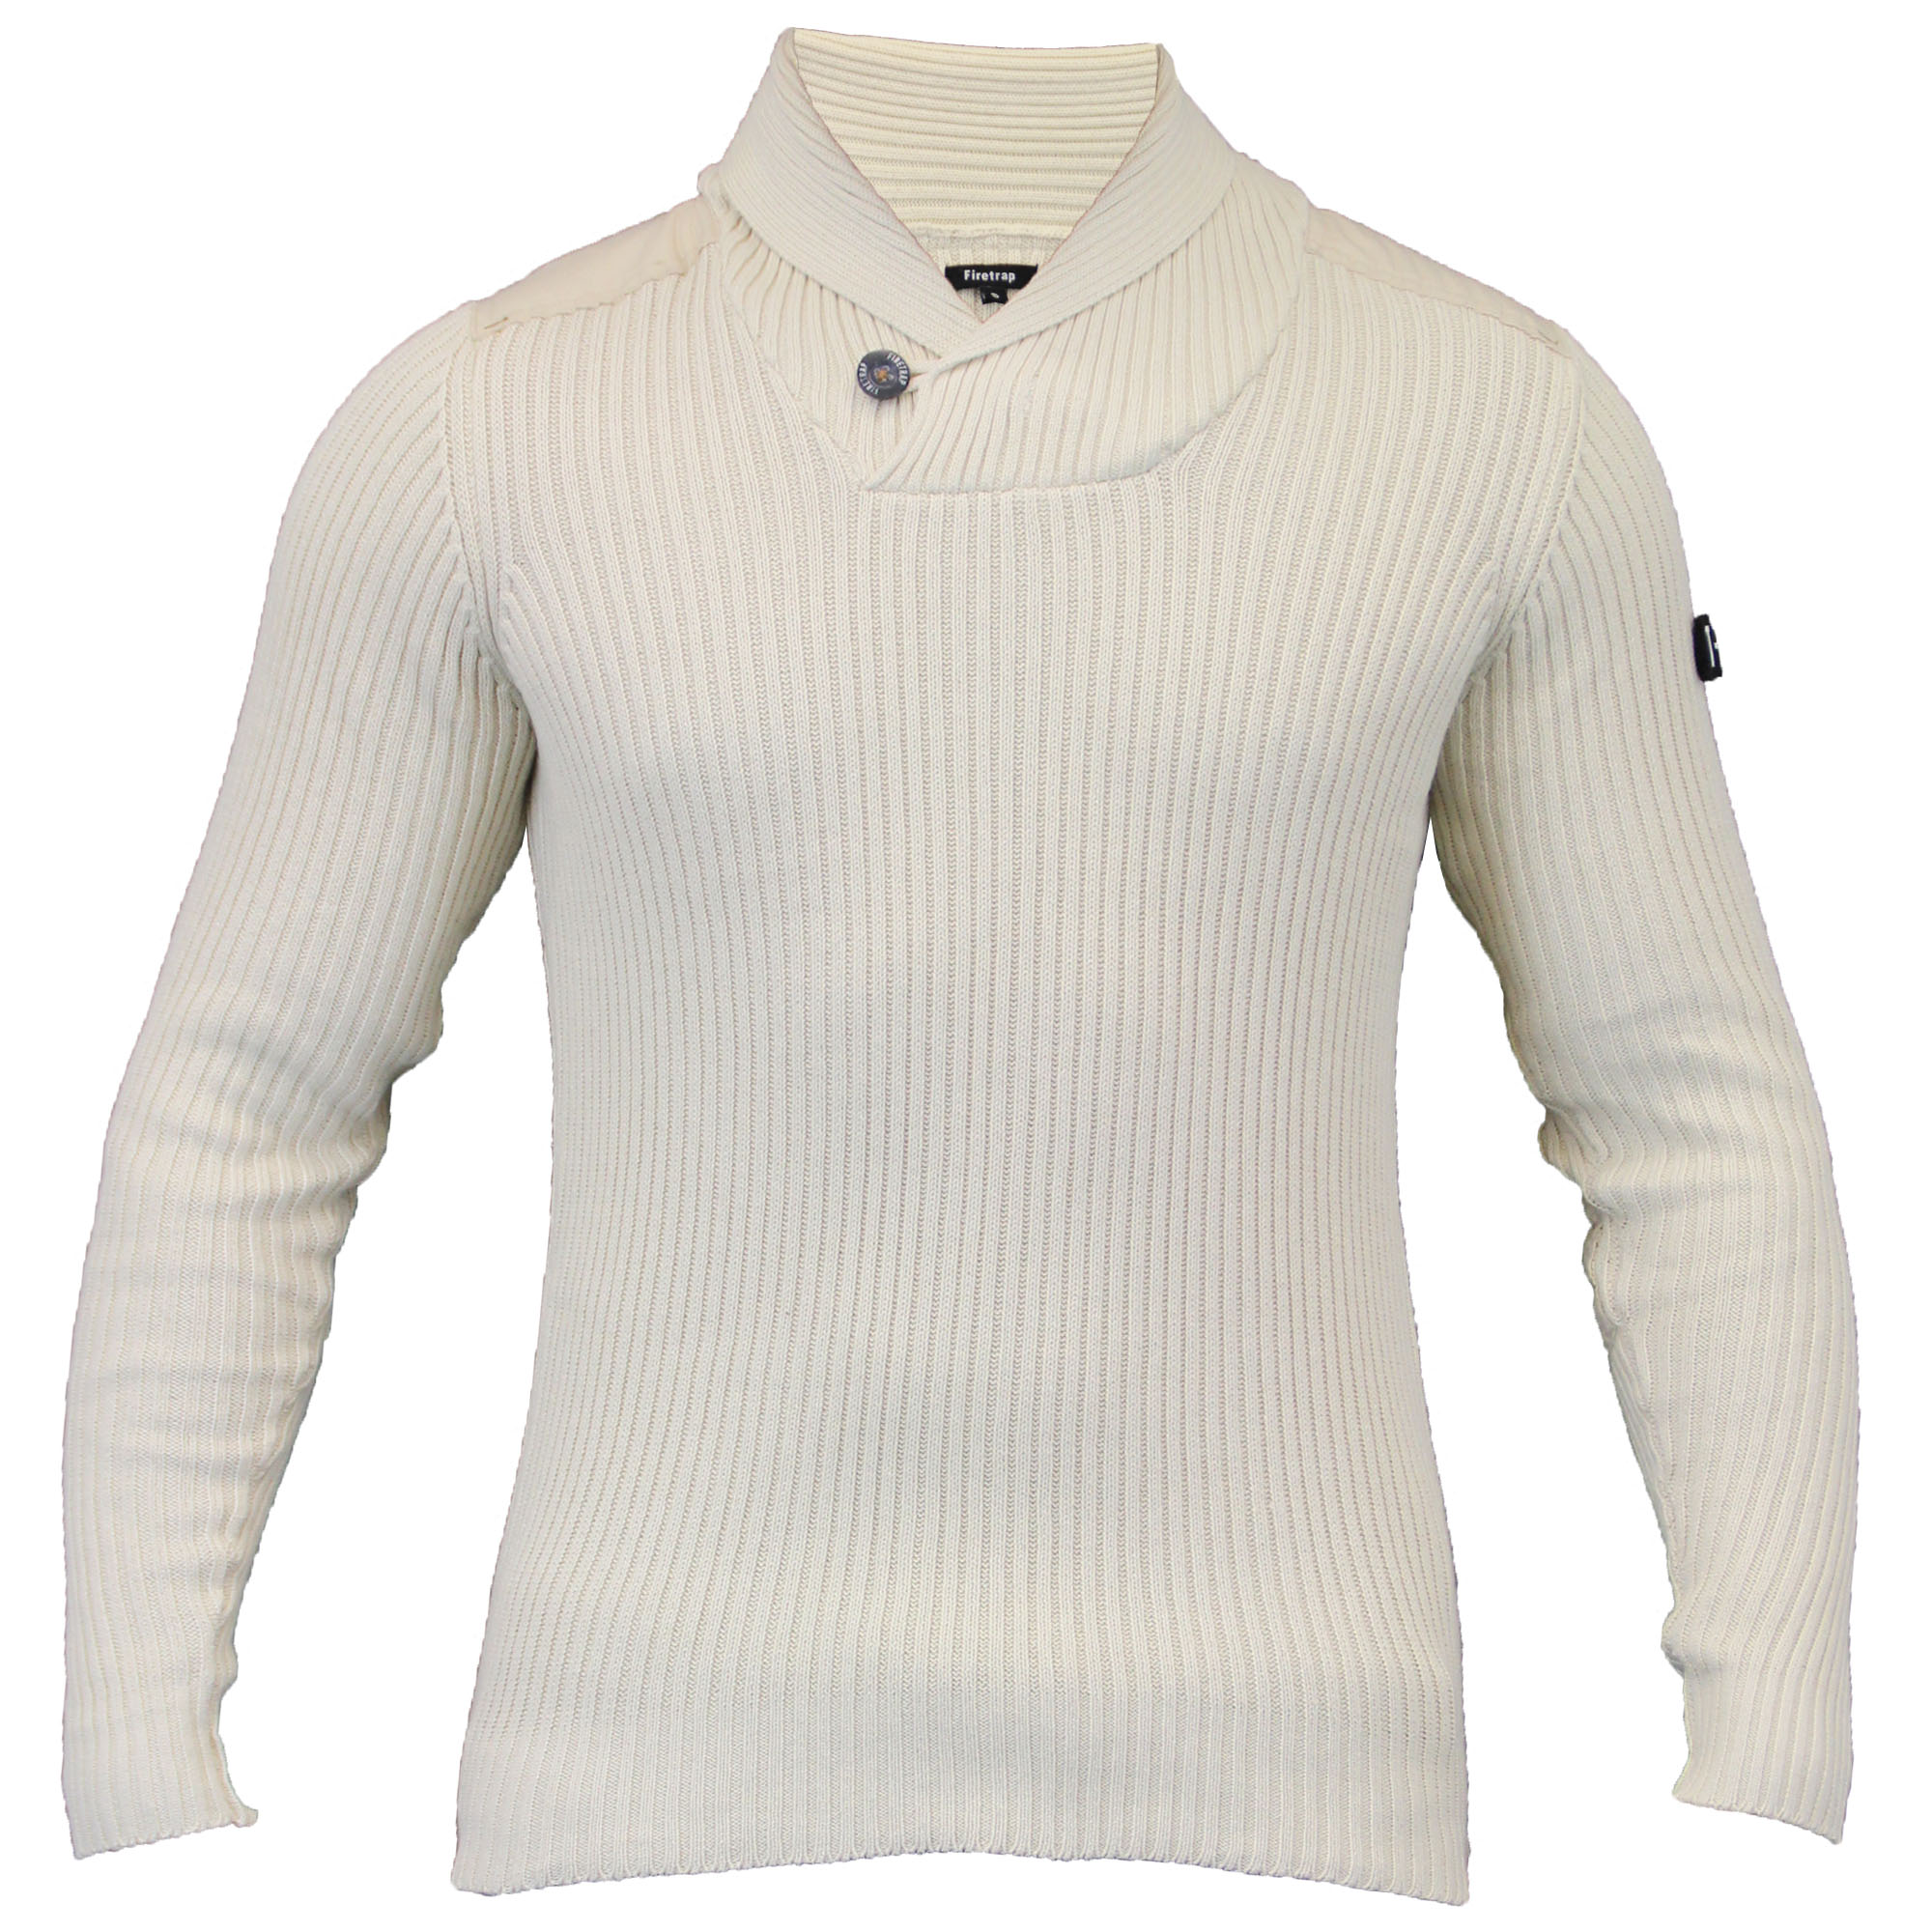 mens jumpers mens-jumpers-firetrap-knitted-top-sweater-pullover-ribbed- PFHAJQA